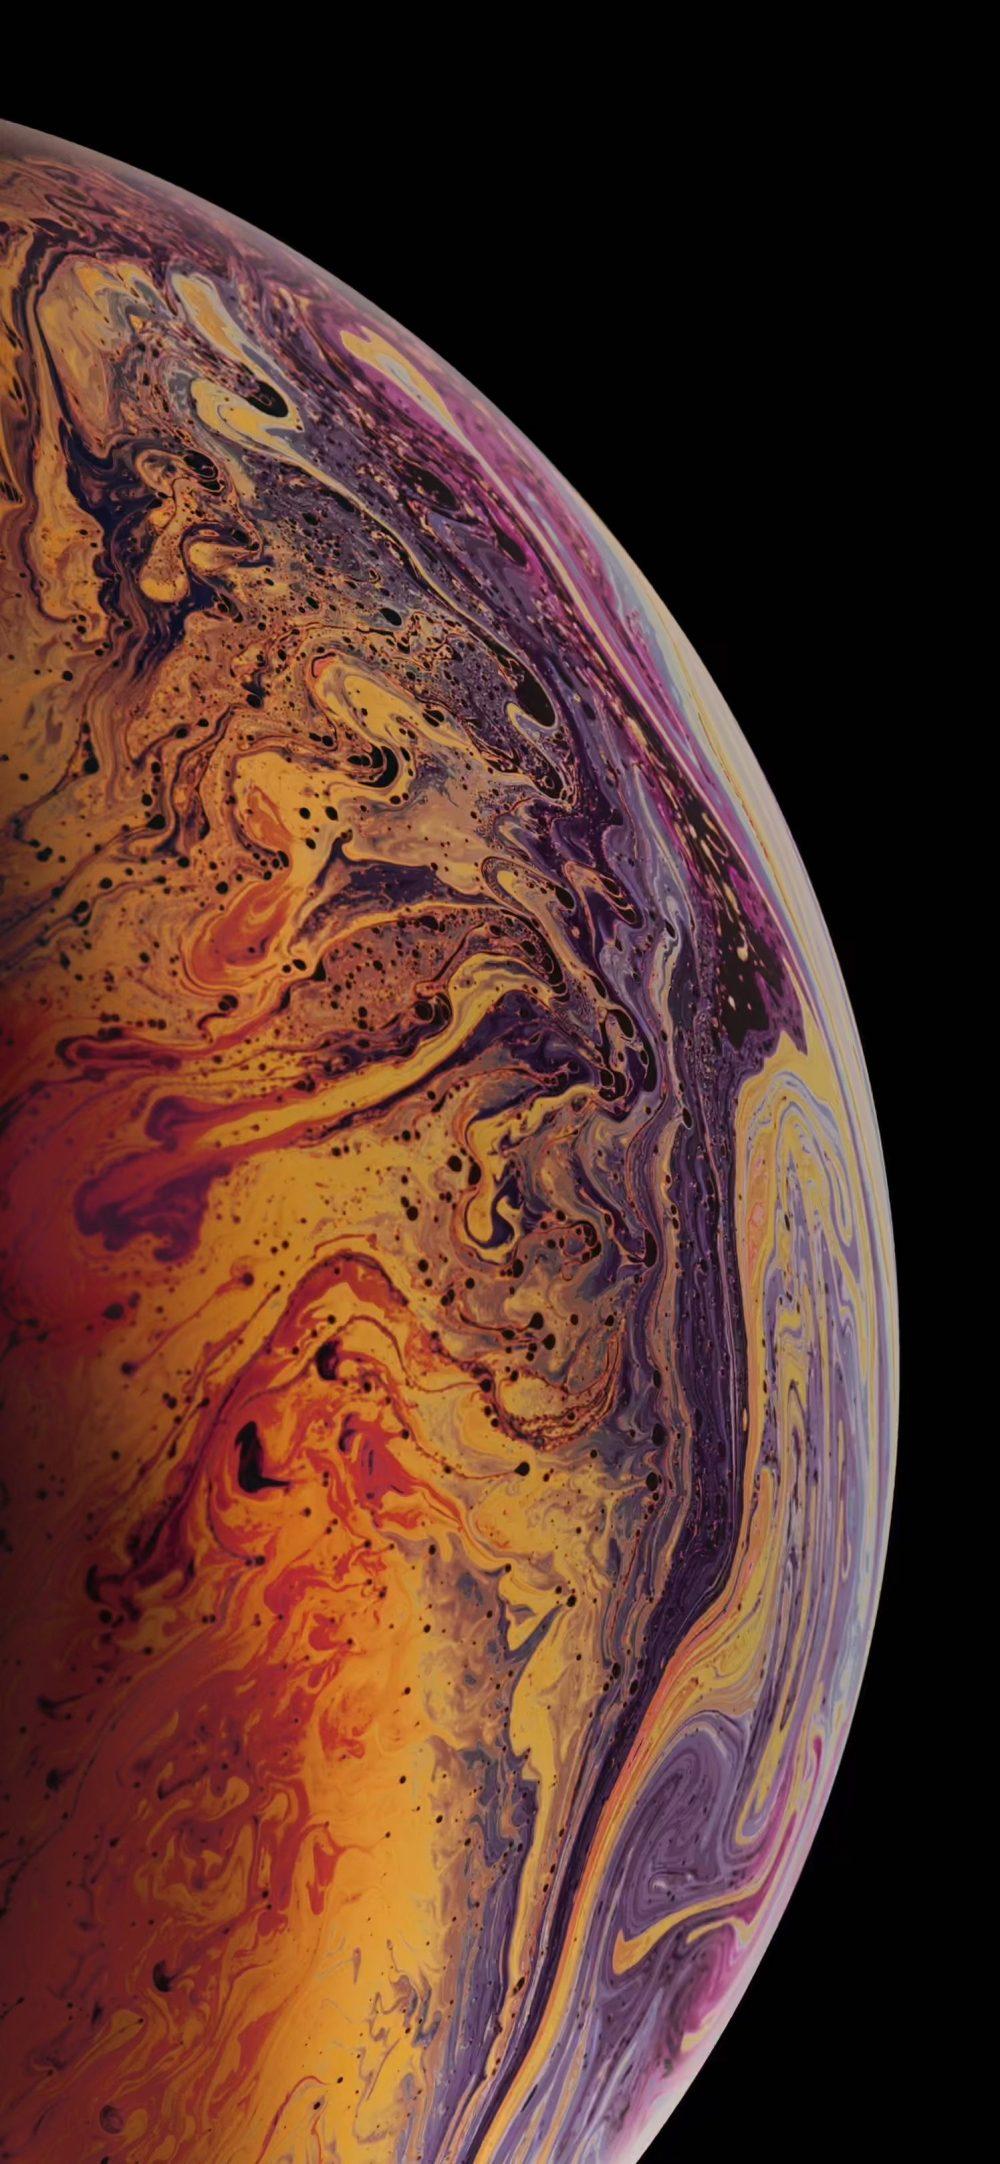 Download The 3 Official iPhone XS and XS Max Wallpaper Here